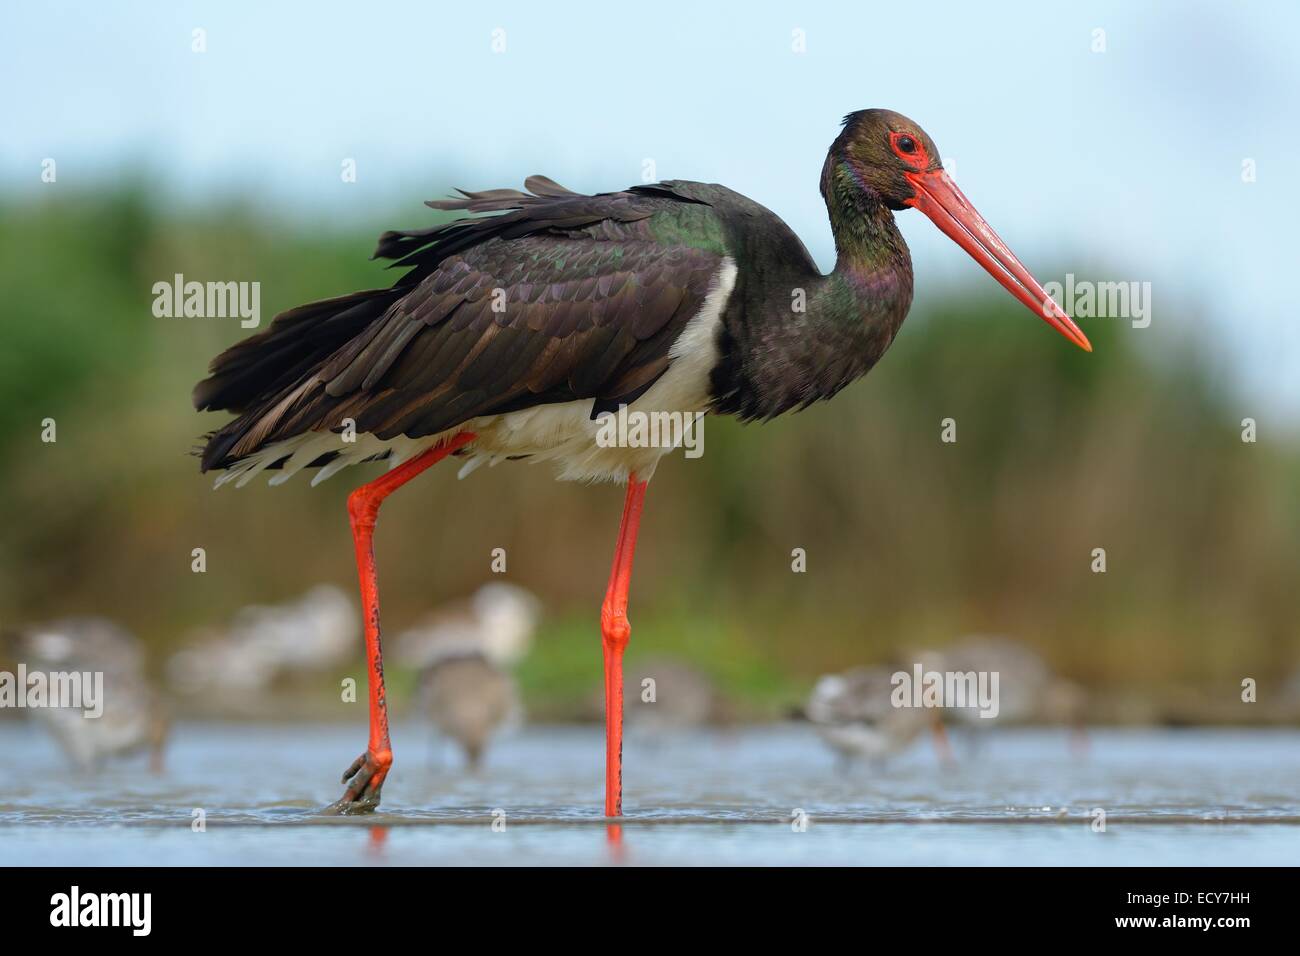 Black Stork (Ciconia nigra), wading in shallow water in search of food, Kiskunság National Park, Hungary Stock Photo